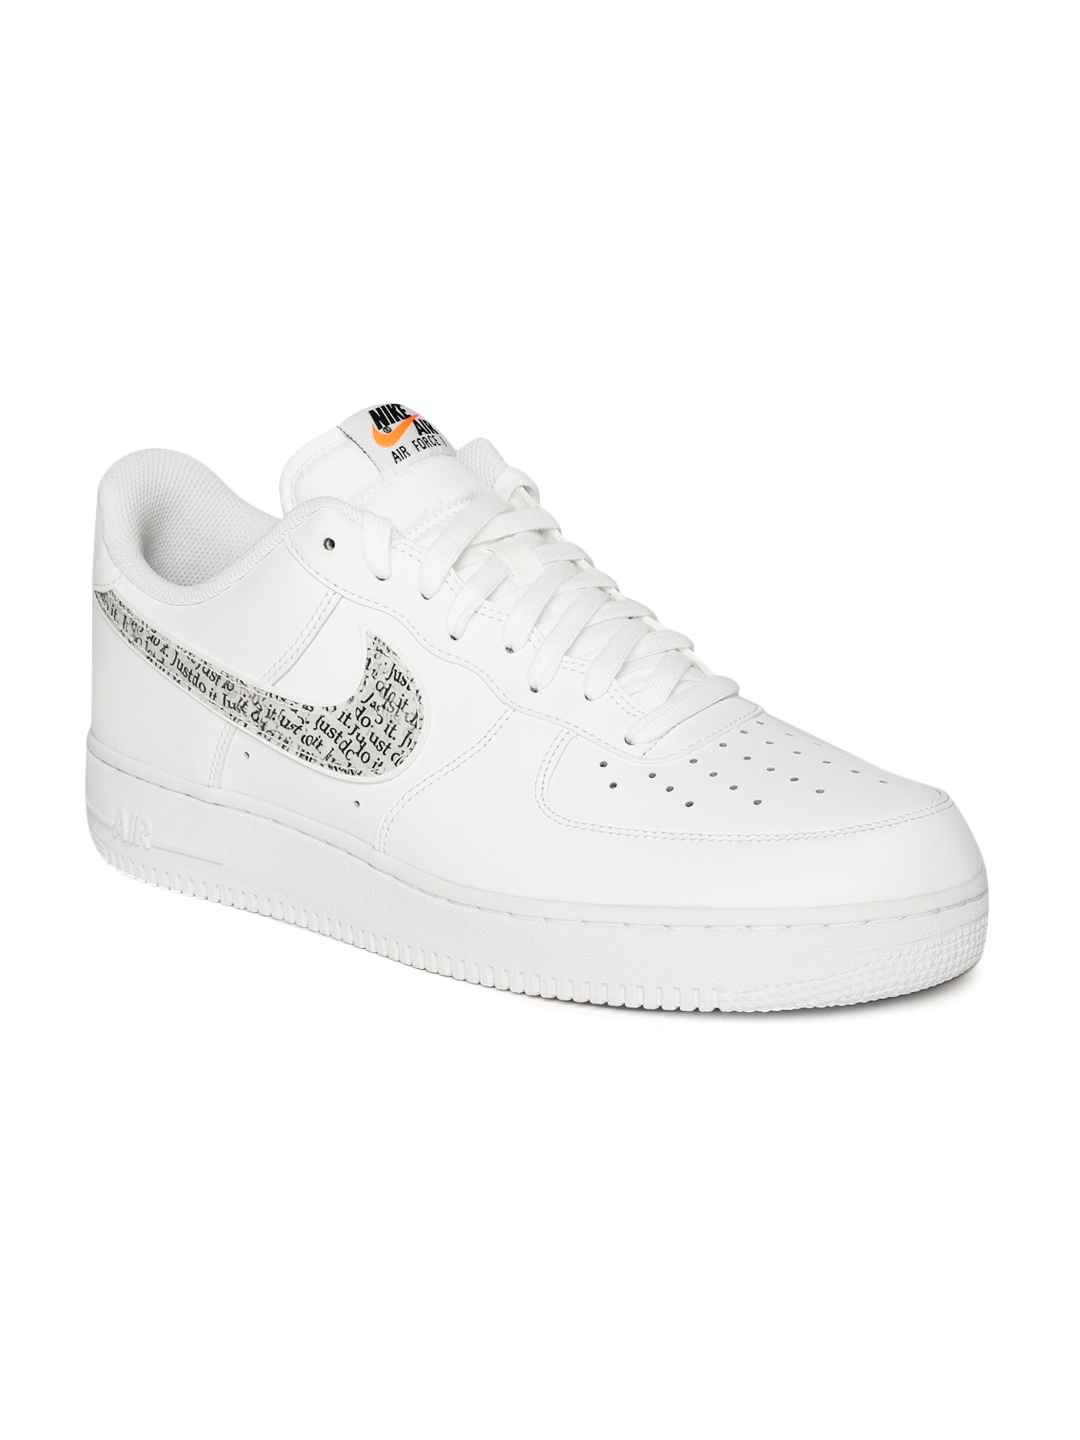 nike air force 1 '07 lv8 women's shoes